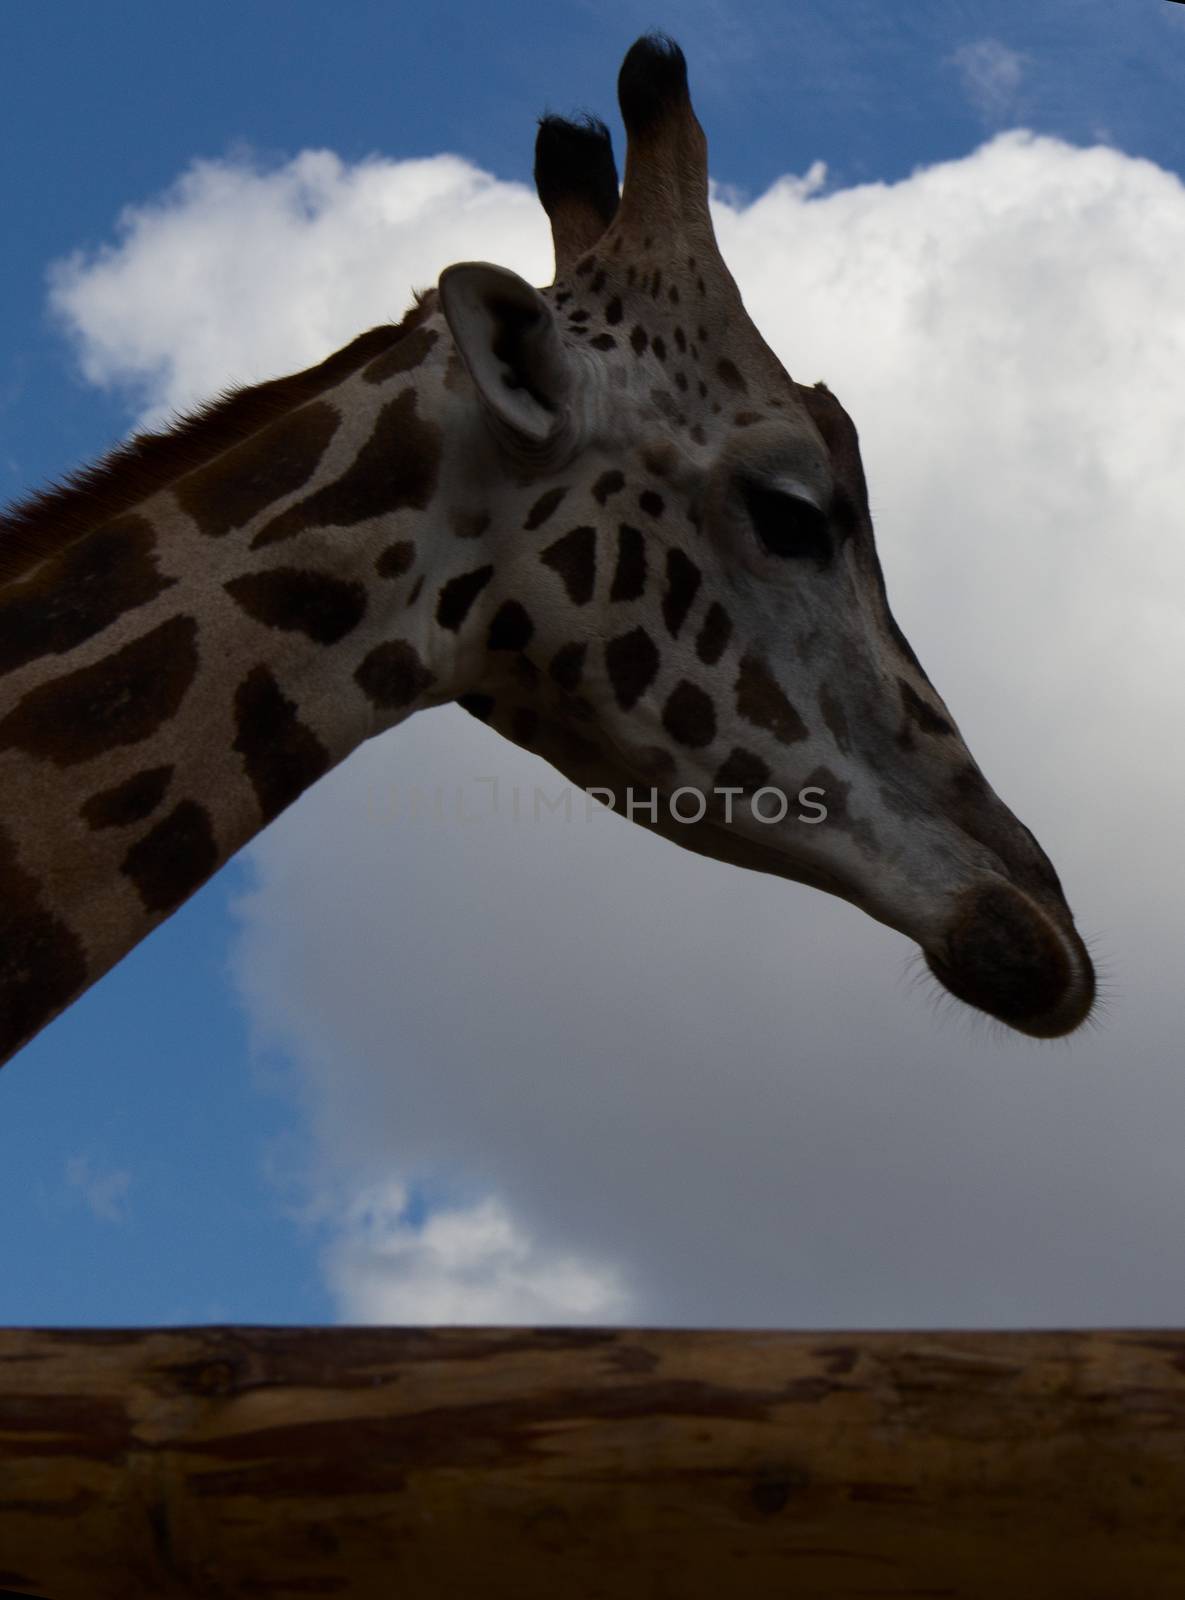 one big giraffe the sky with clouds. photo